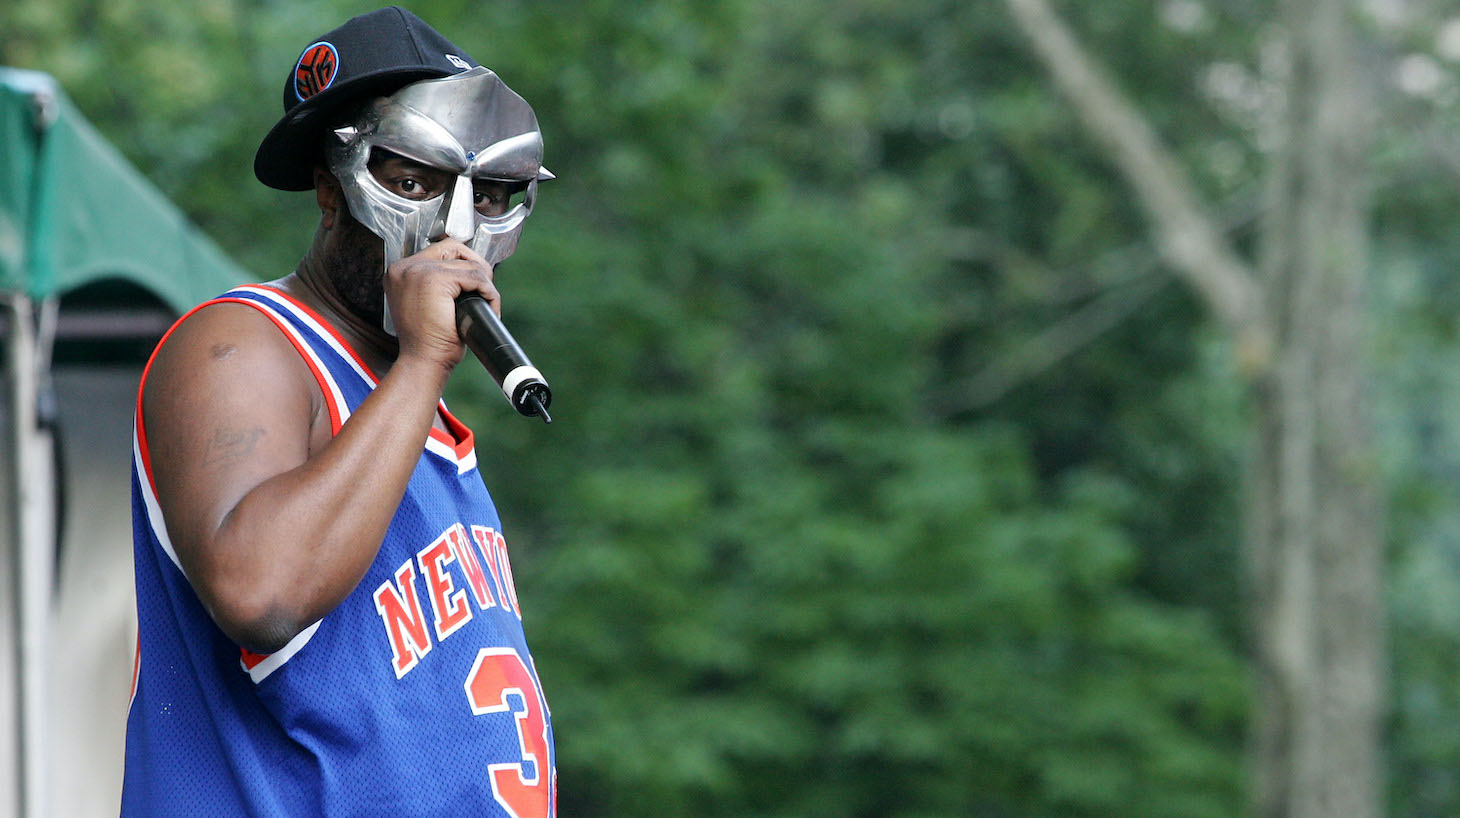 Rapper MF DOOM performs at a benefit concert for the Rhino Foundation at Central Park's Rumsey Playfield on June 28, 2005 in New York City.